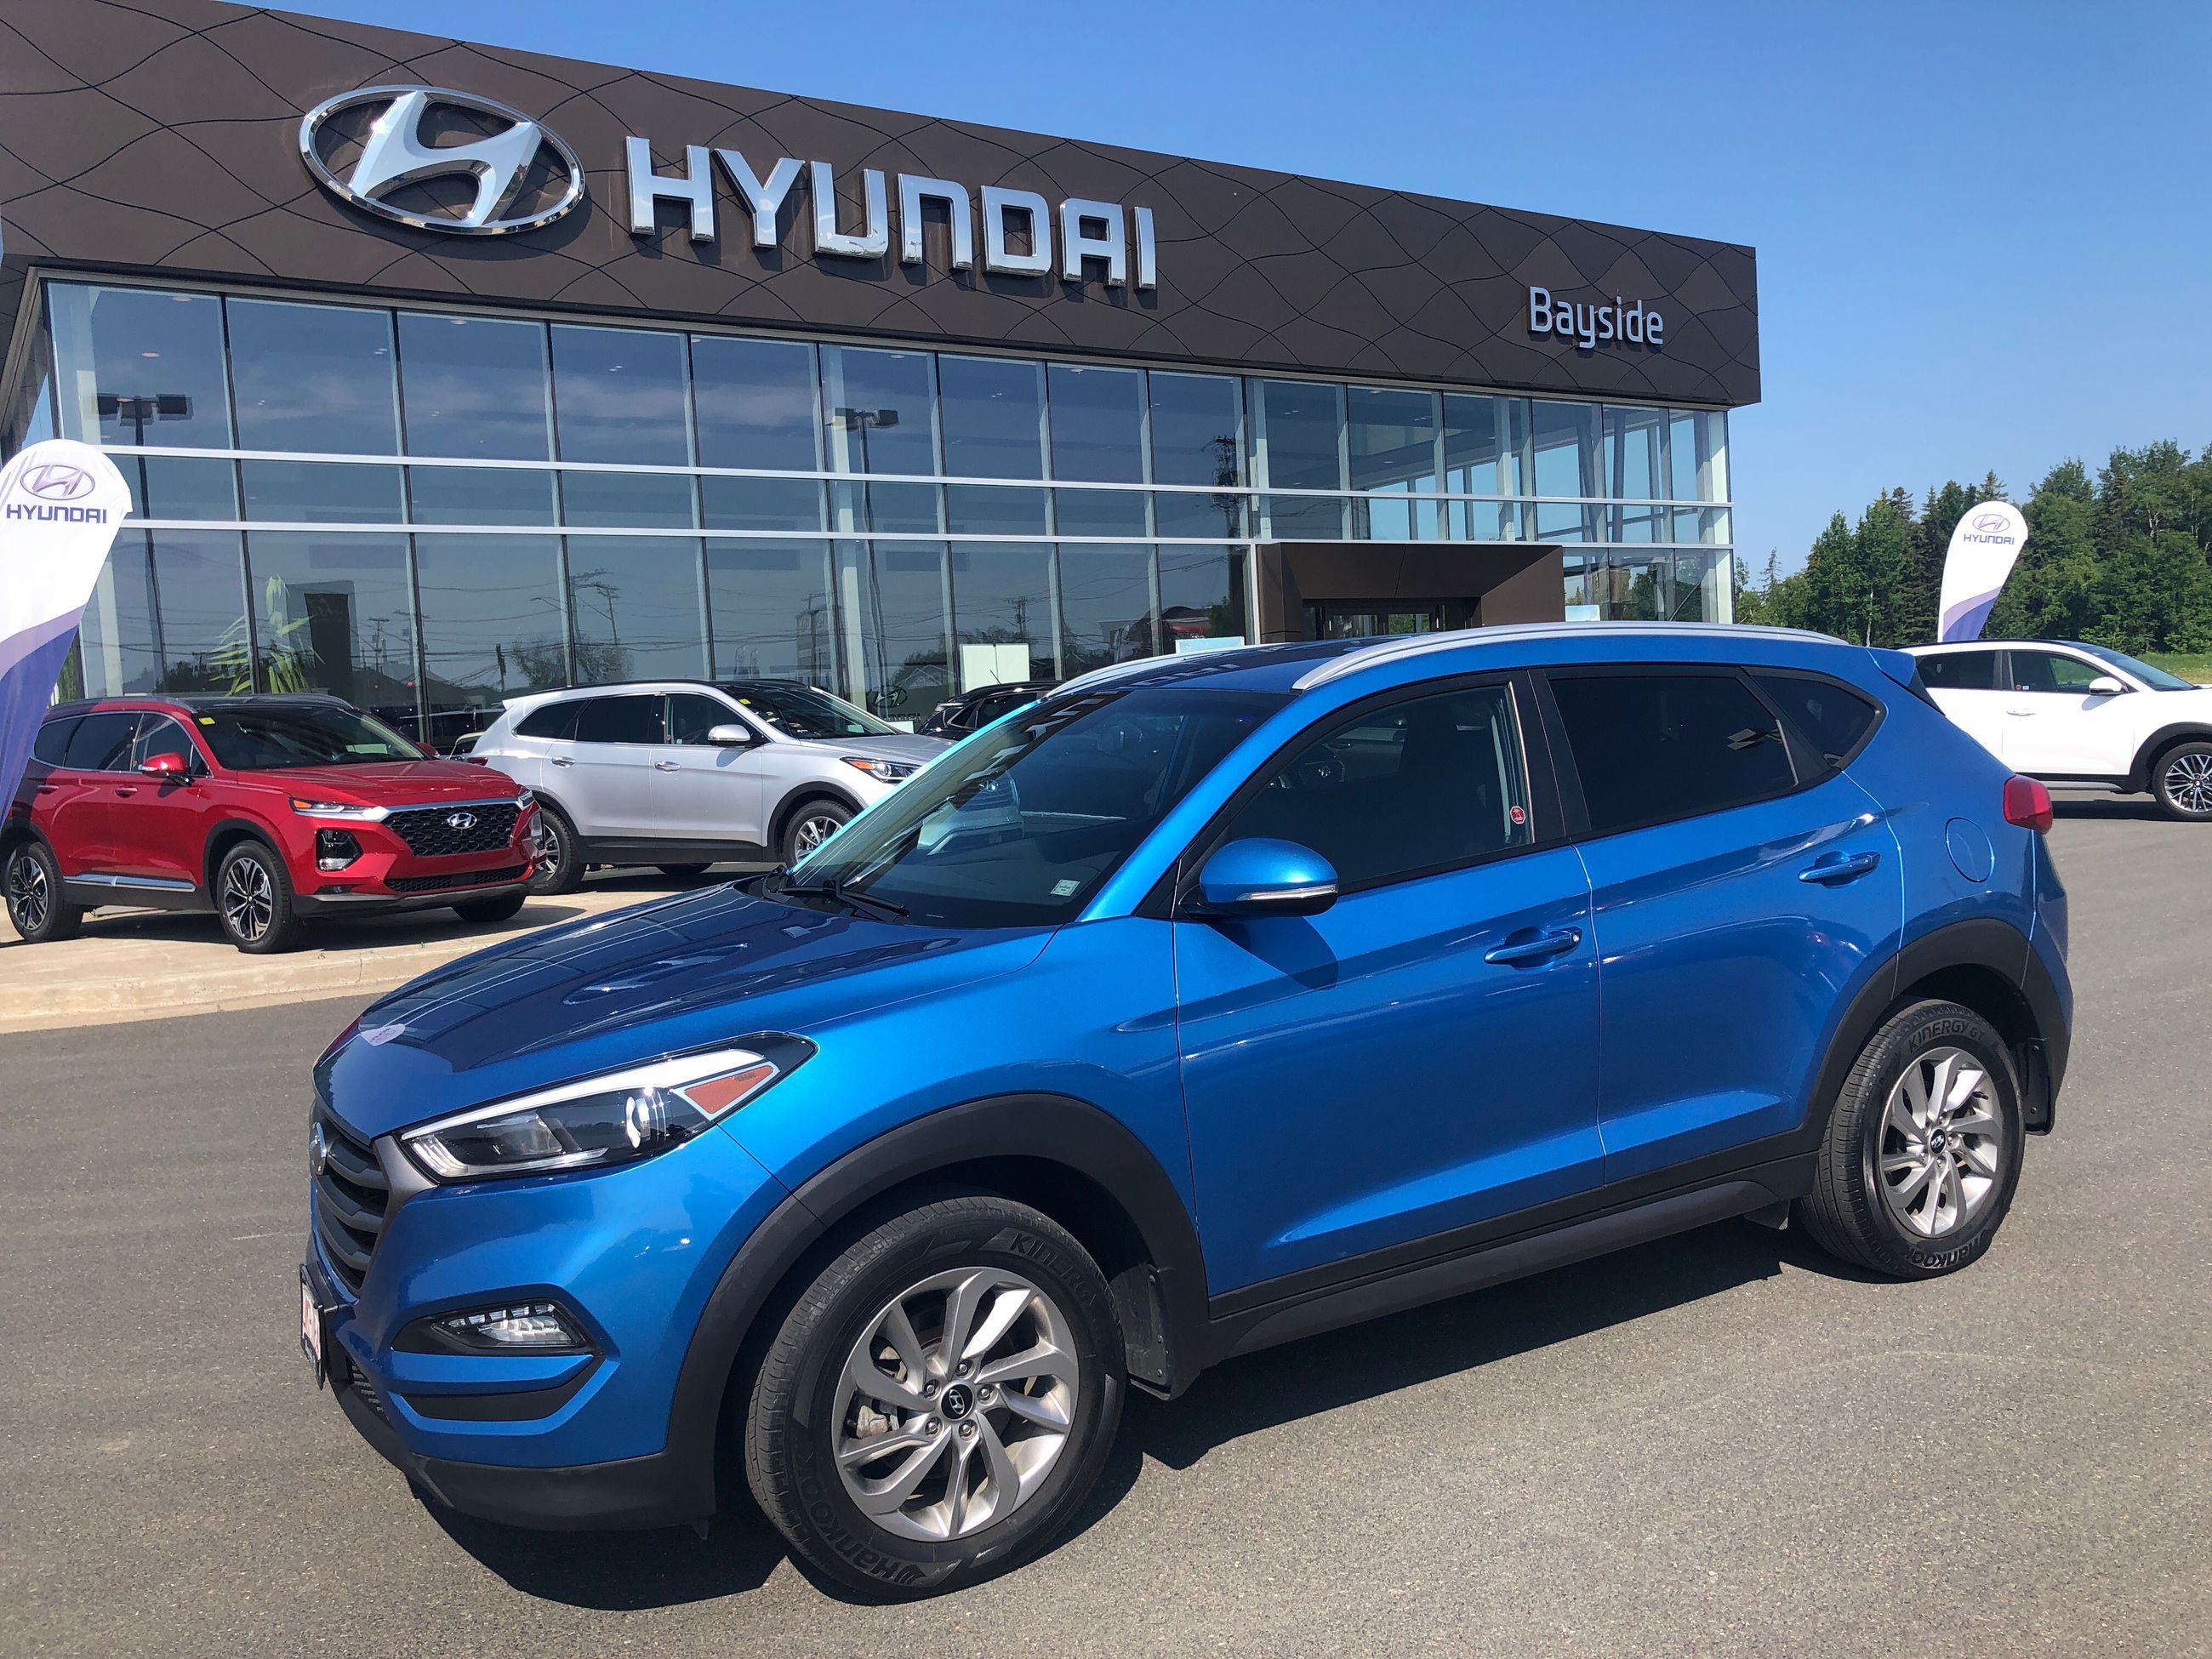 25.08.2017 · which used 2014 hyundai sonata is right for me? Used 2016 Hyundai Tucson Premium in Bathurst - Used